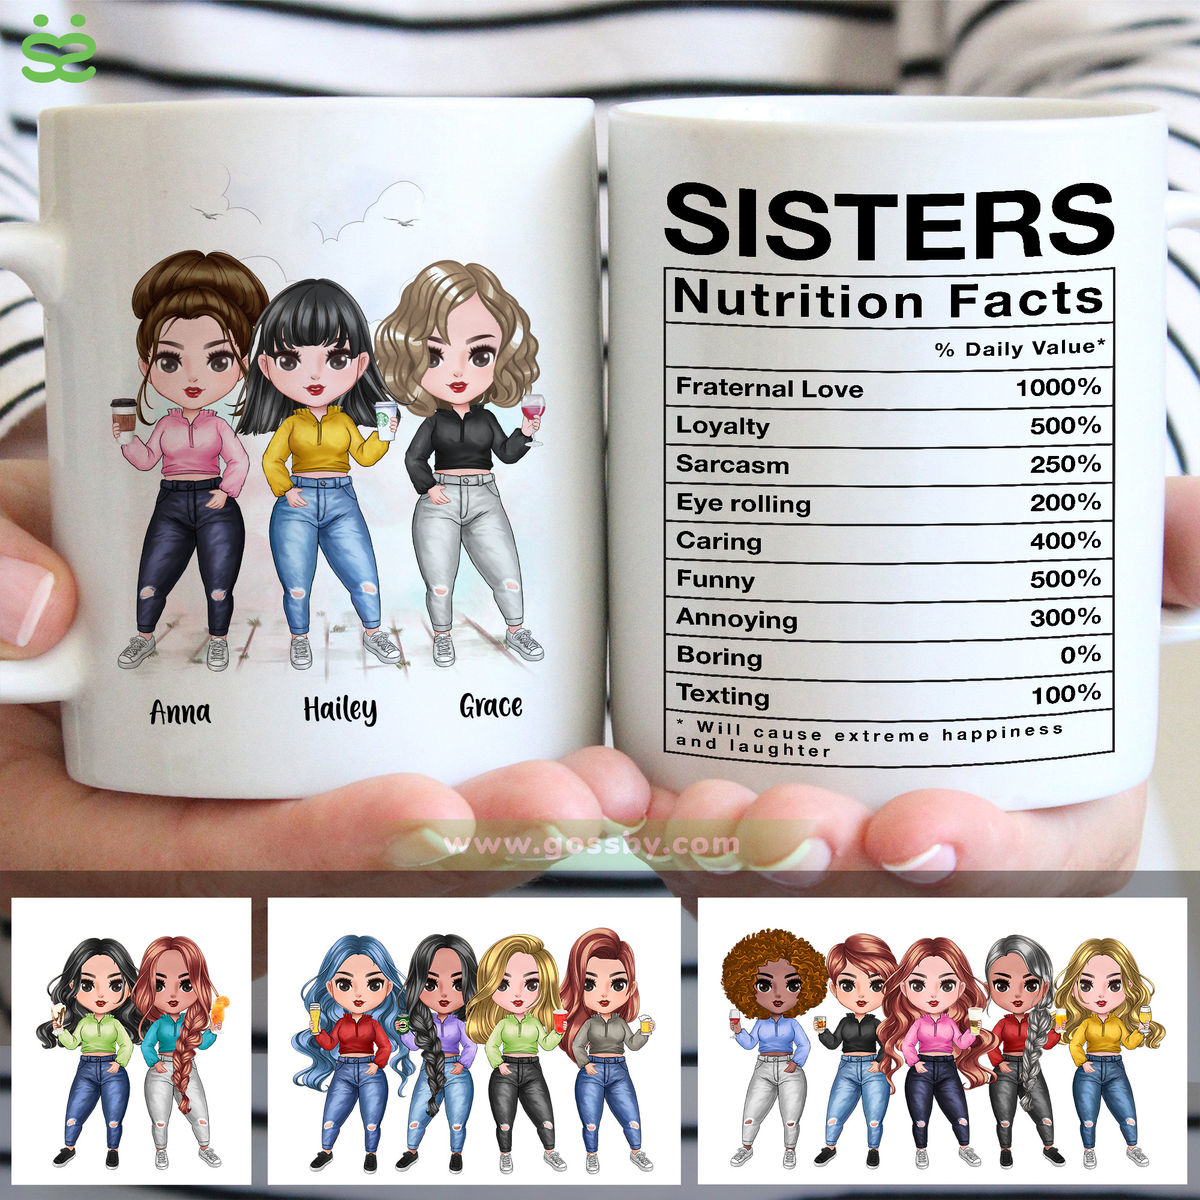 Personalized Mug - Up to 7 Girls - Sisters Nutrition Facts (6345)